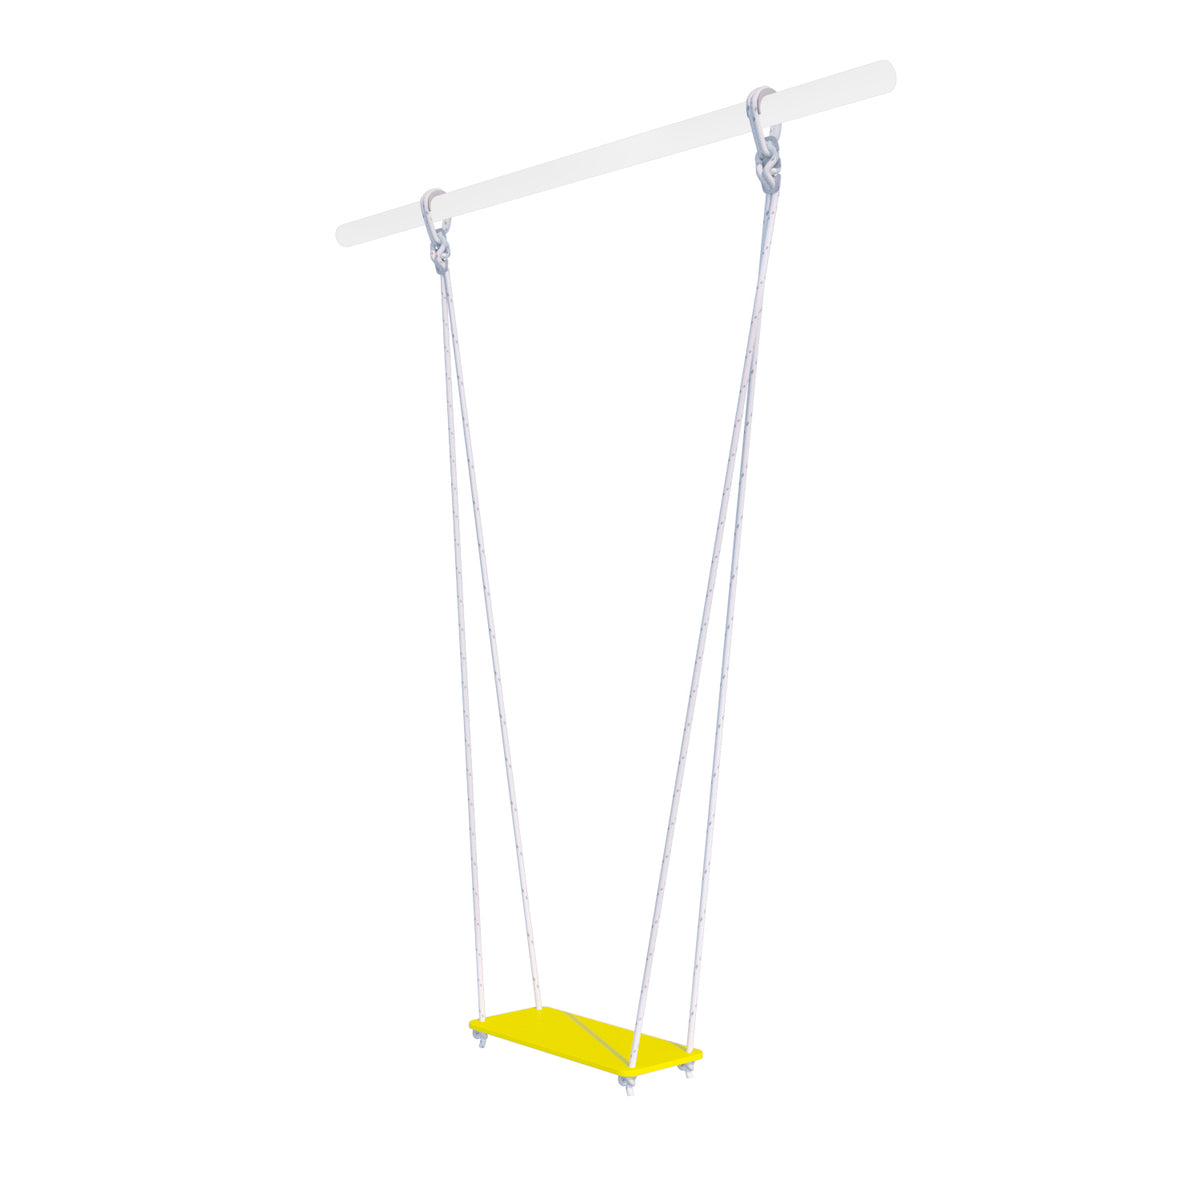 Yellow Classic Swing for indoor jungle gym - Brainrich Kids